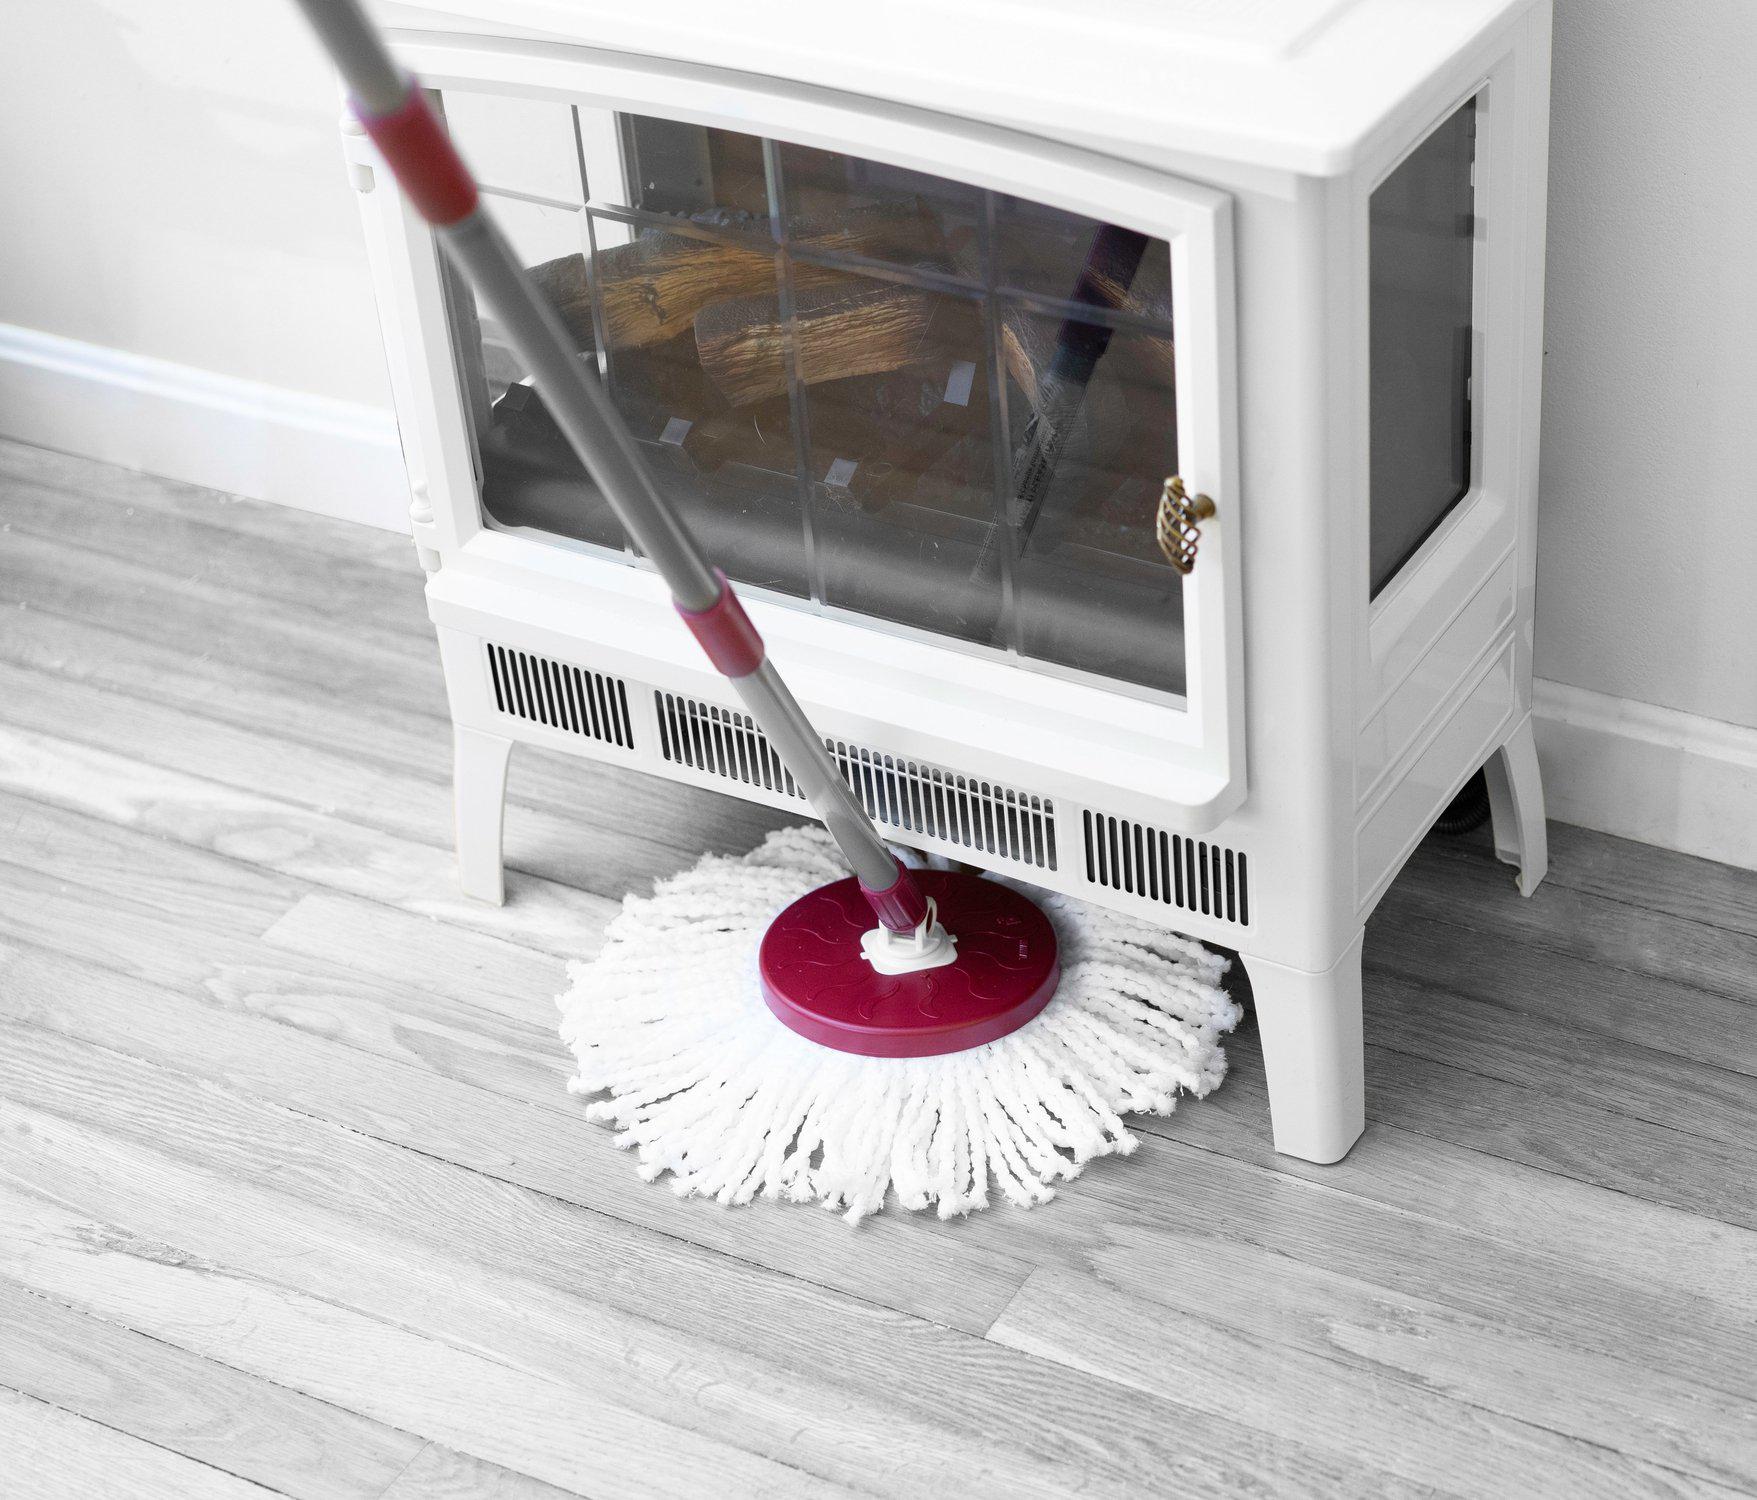 This Spin Mop Won't Leave Behind 'Any Streaks,' and It's on Sale